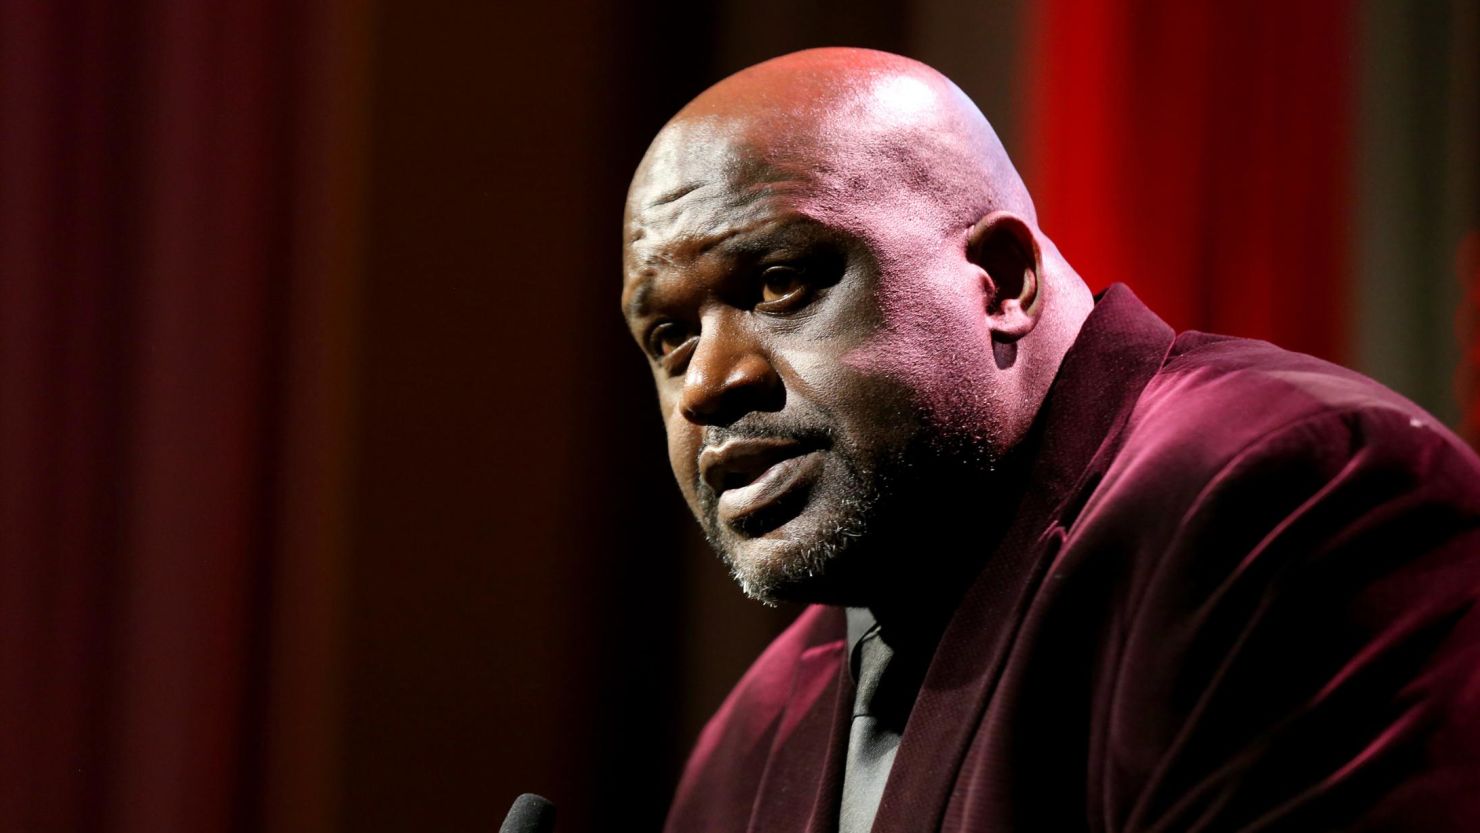 Shaquille O'Neal is covering the funeral costs for an 11-year-old killed in a car wreck.